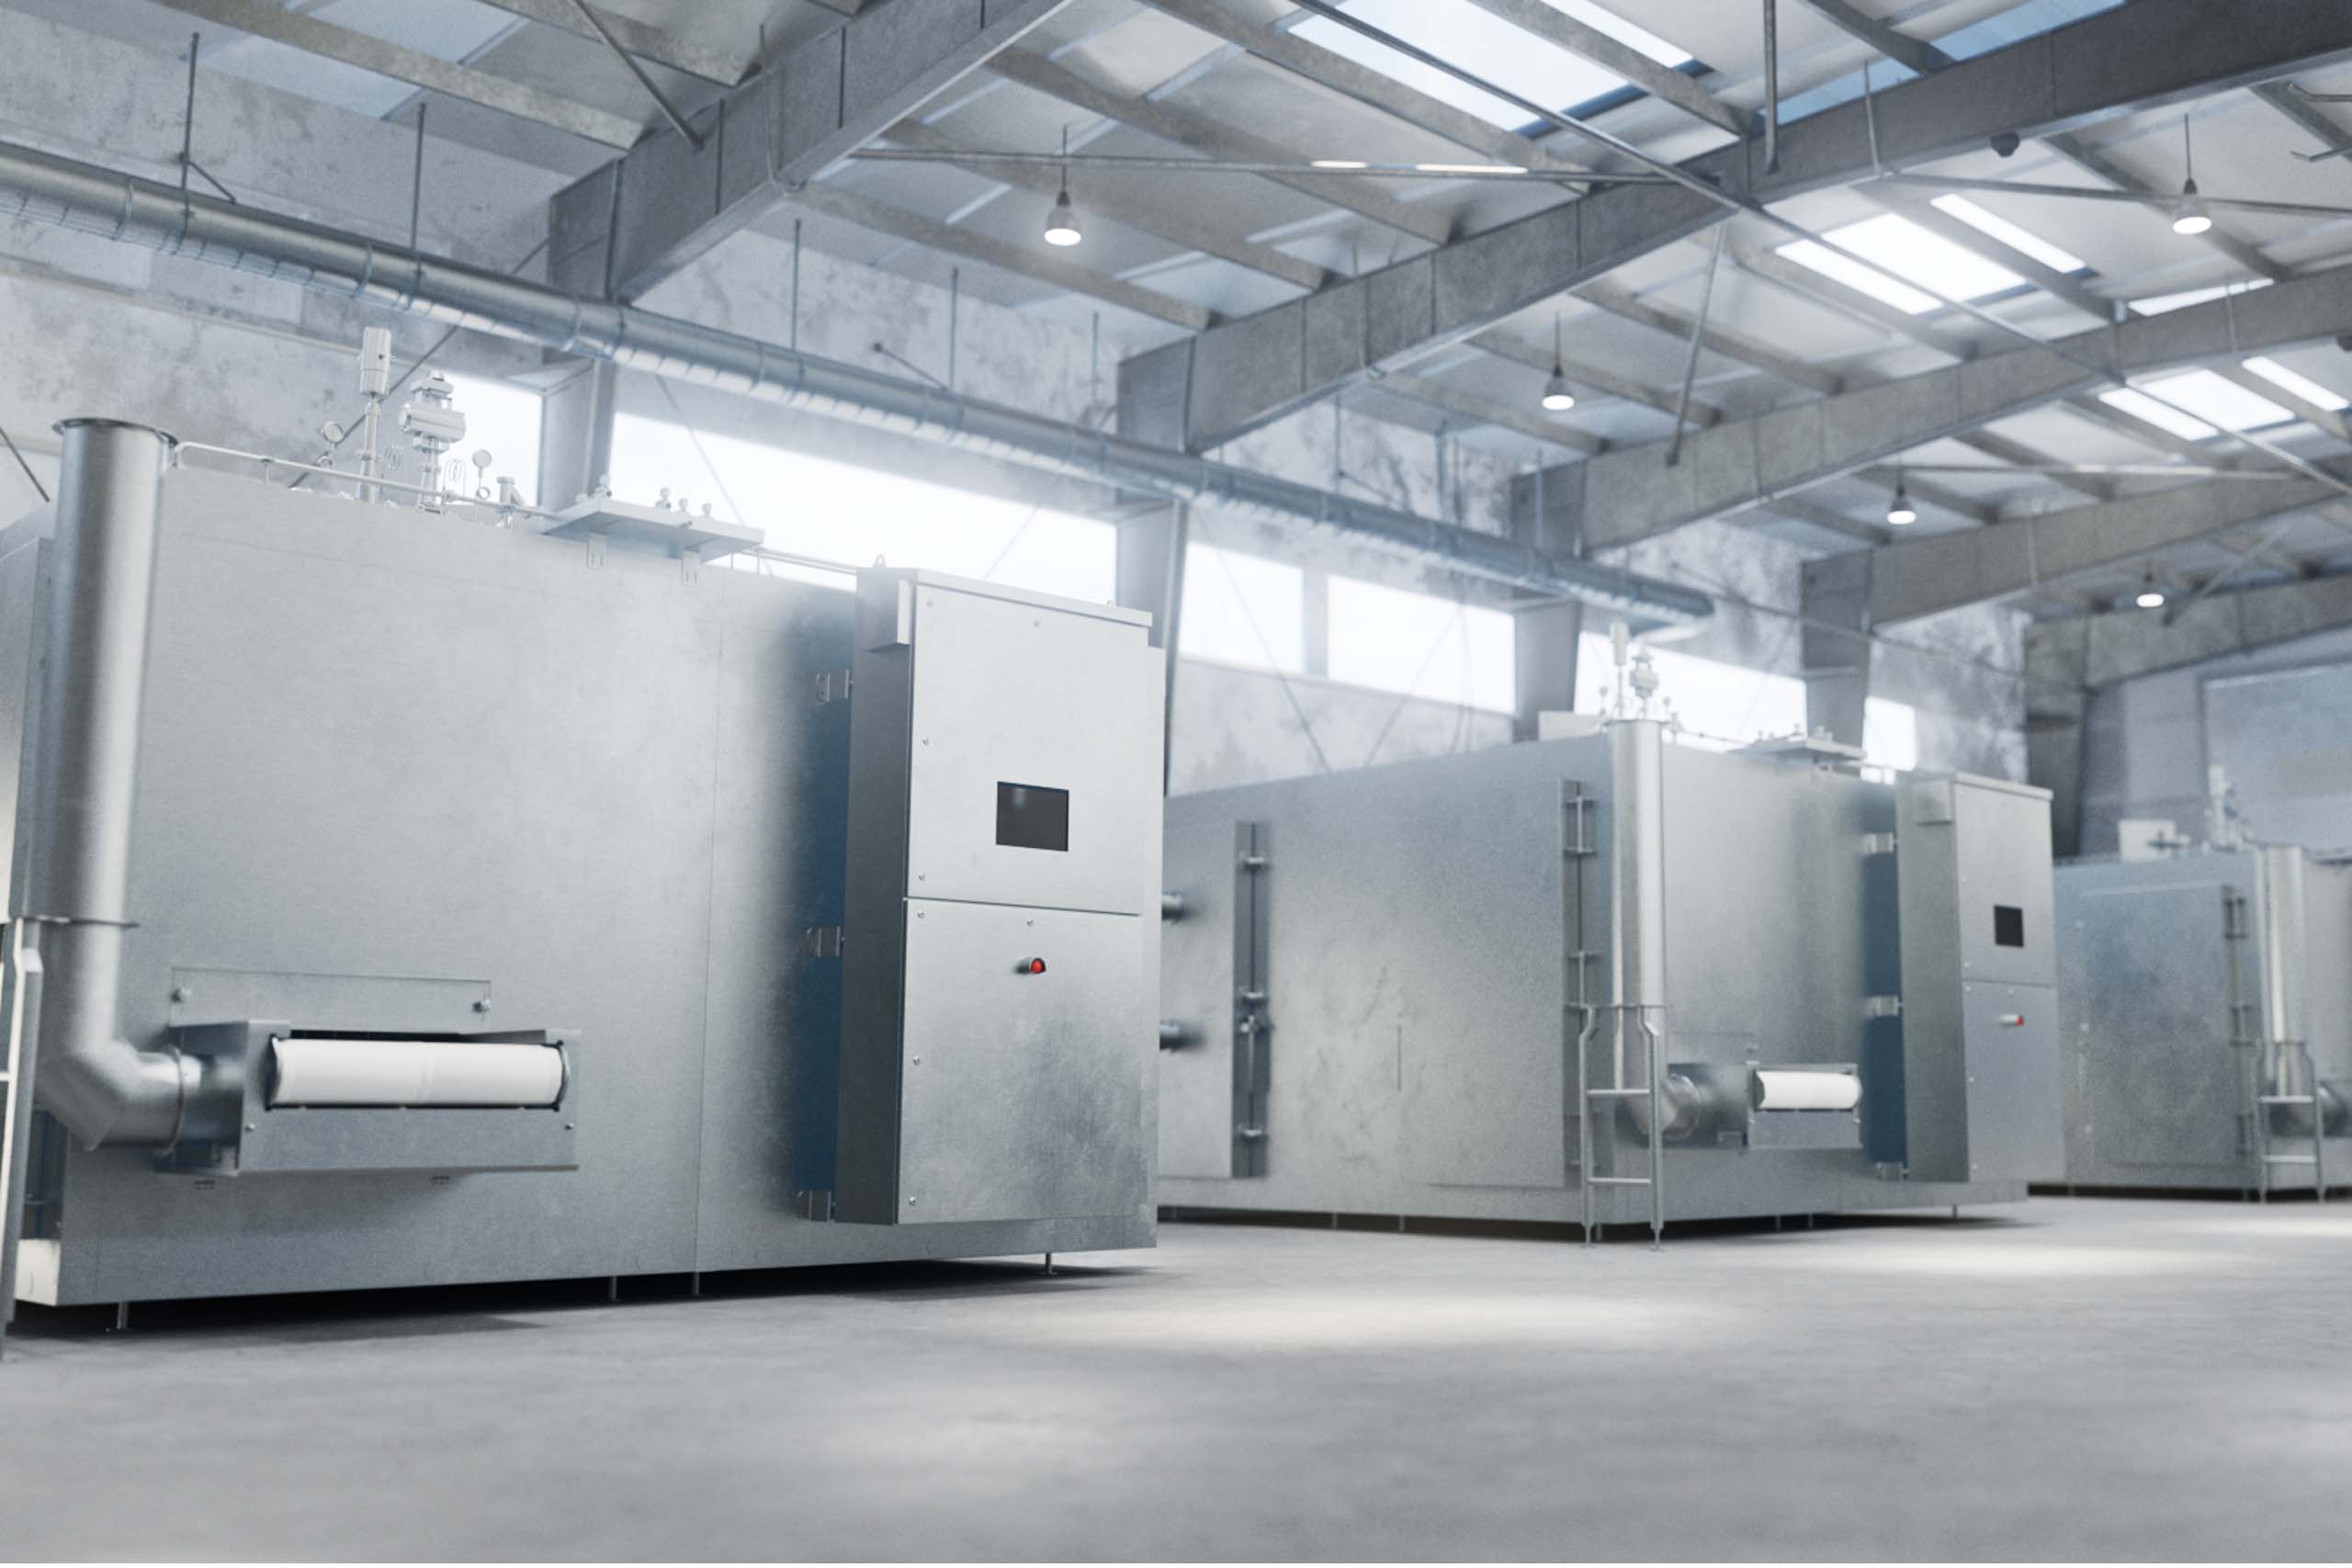 Cryogenic spiral freezers from DSI Dantech